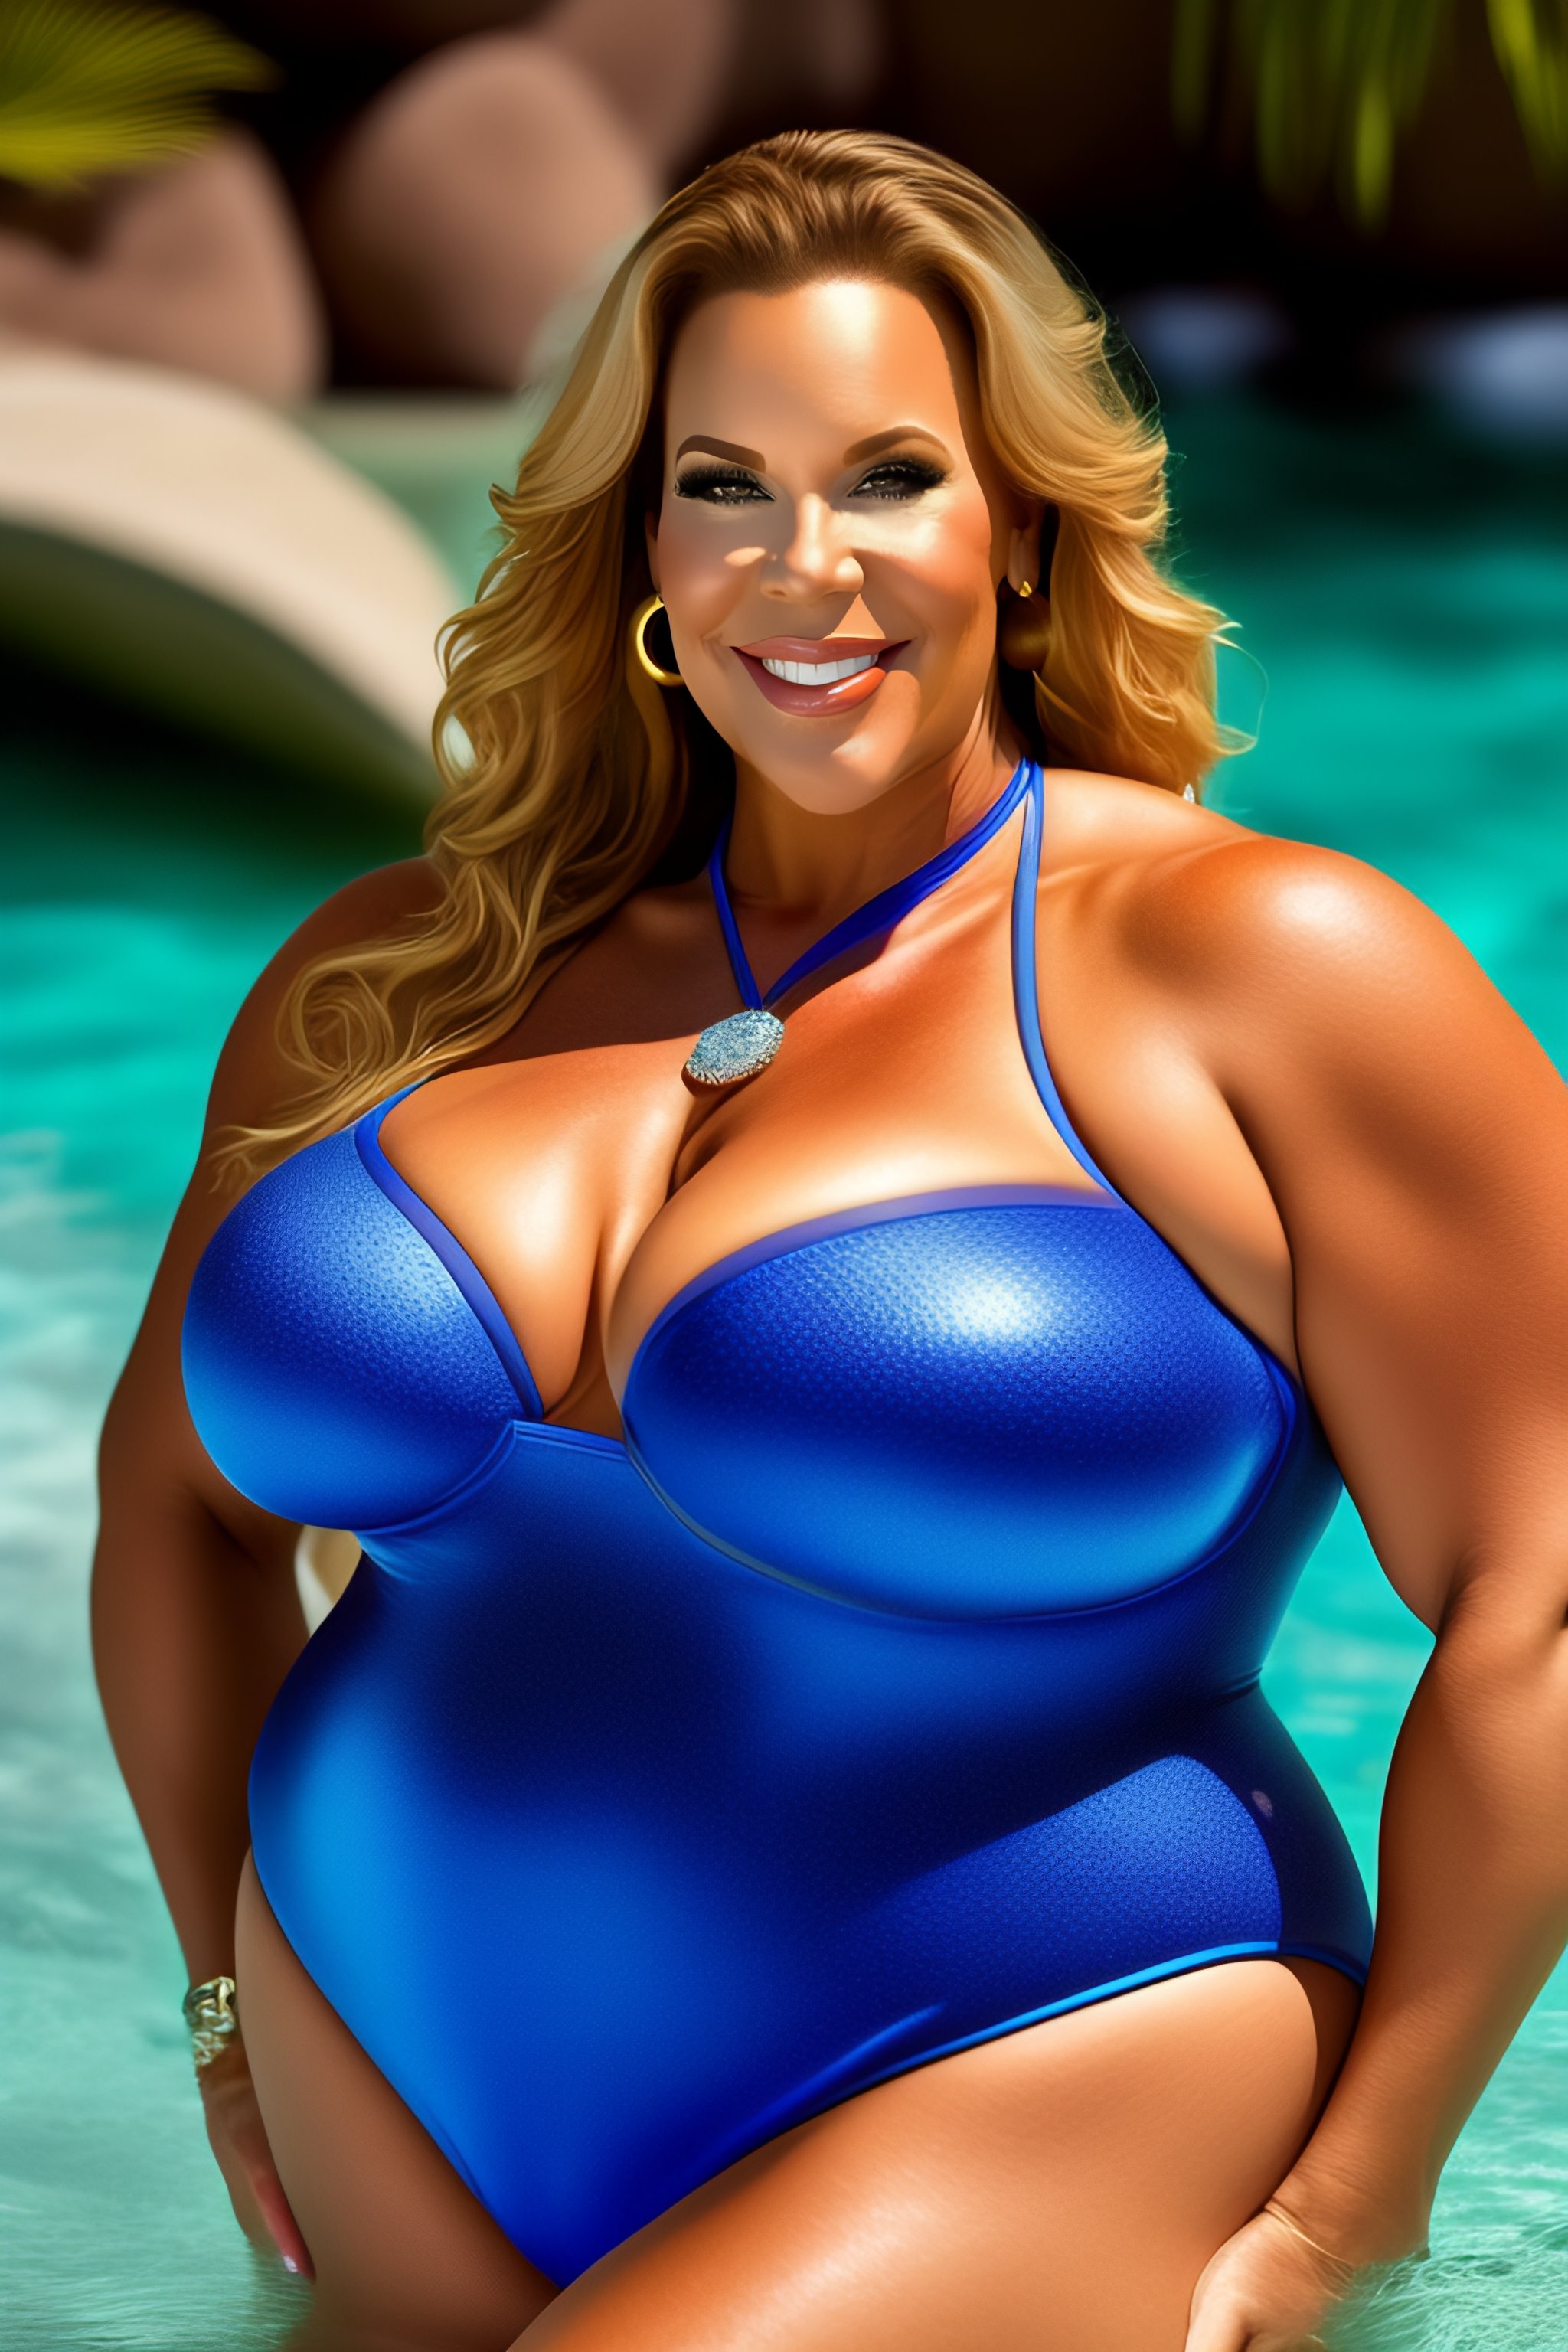 Lexica - Chelsea Charms in bathing suit